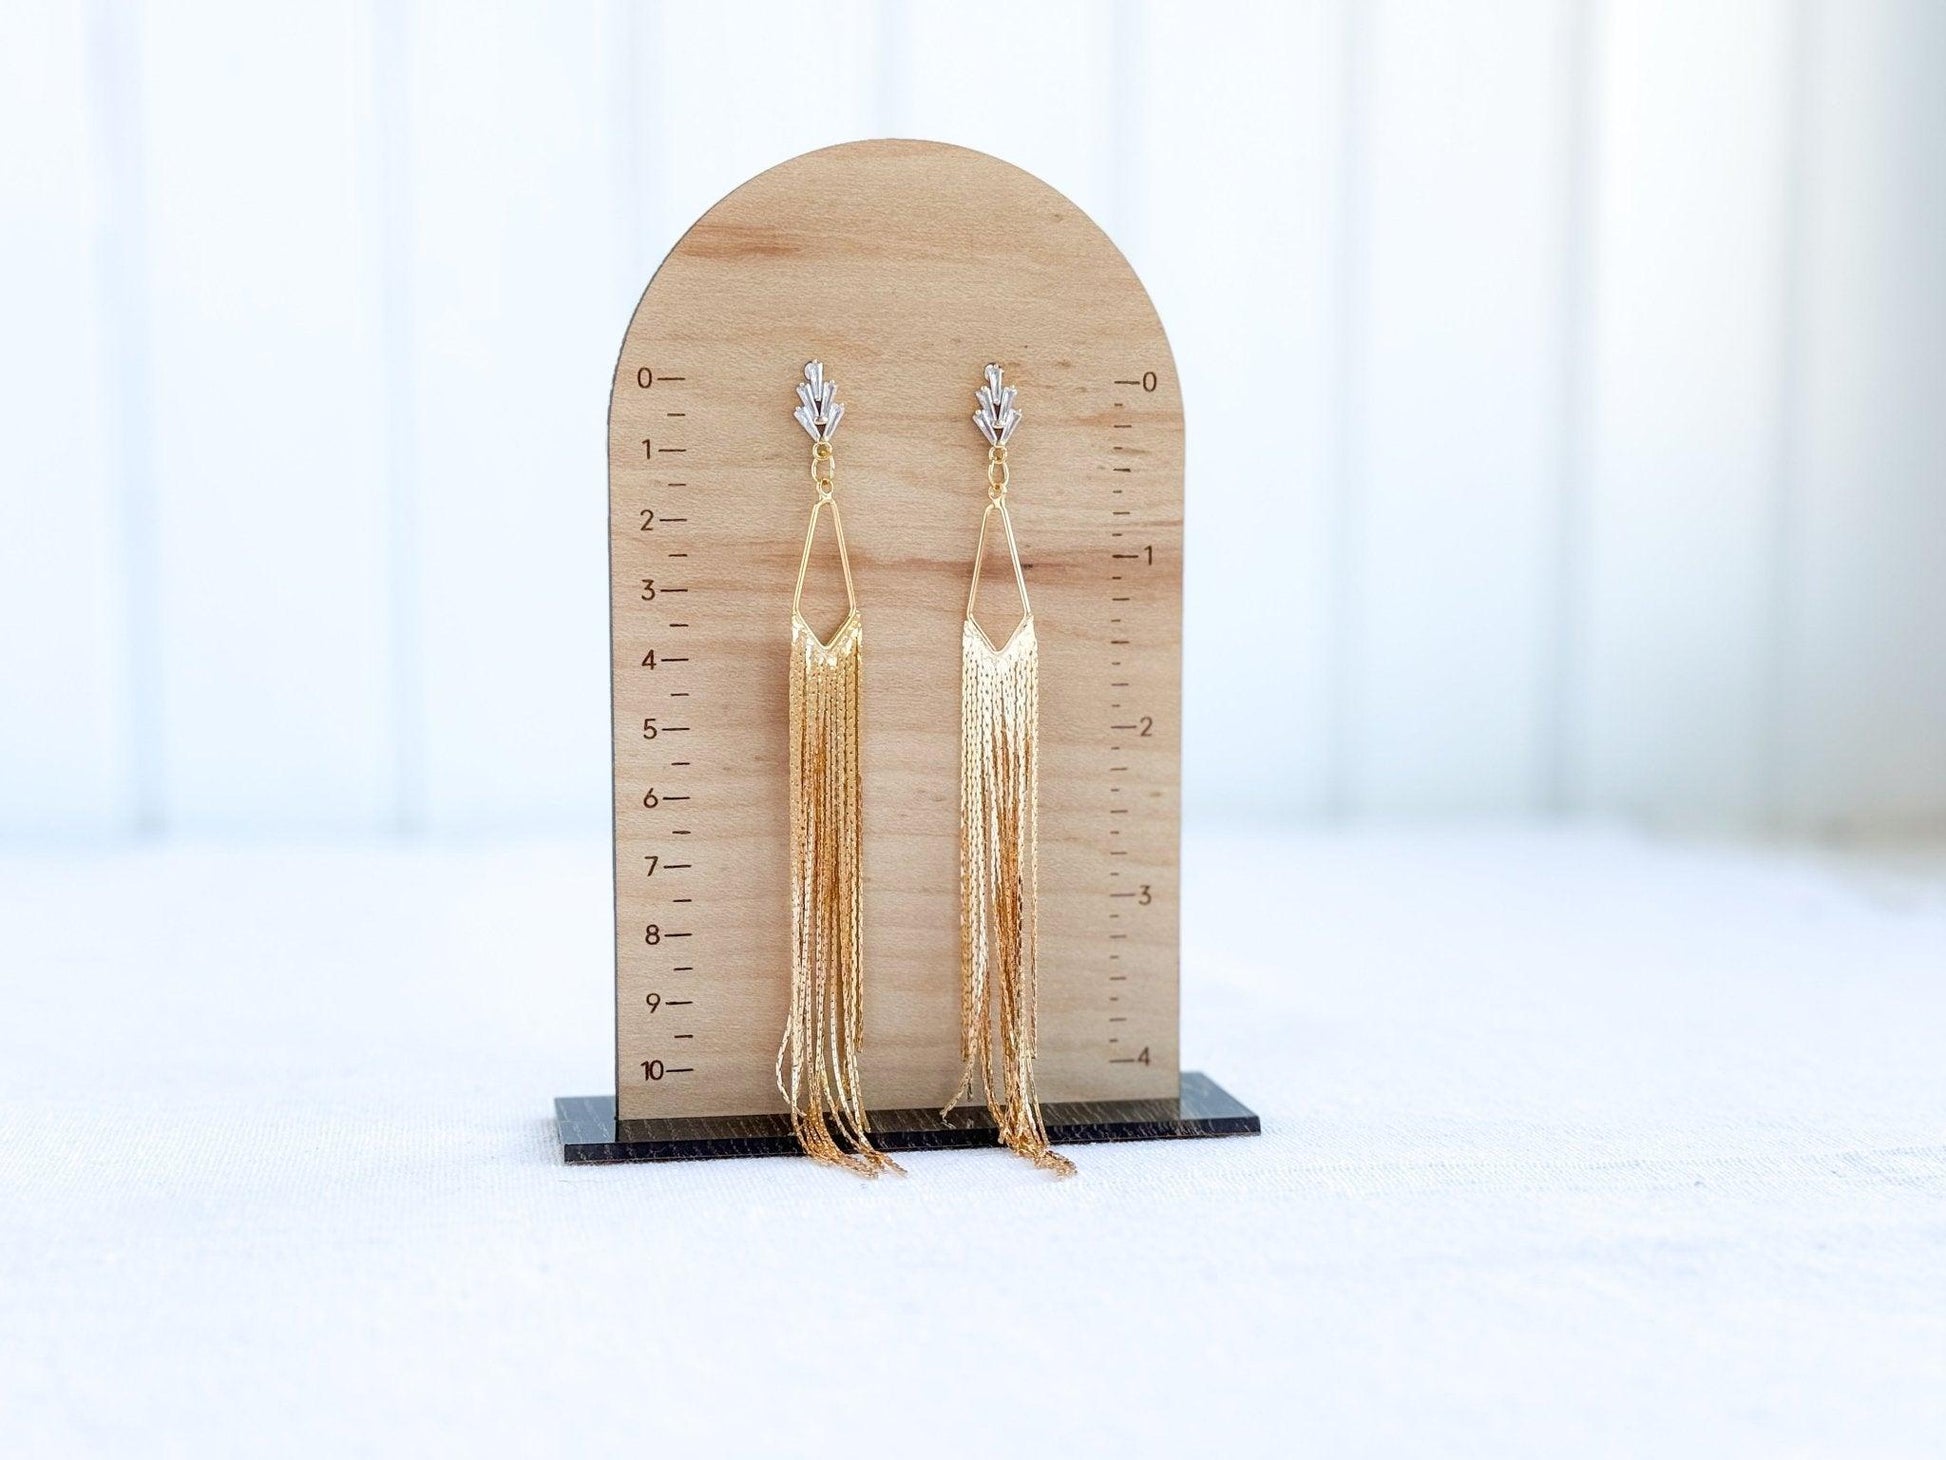 Gold Drop Earrings, Taylor Swift Jewelry, Holiday Gifts, Handmade Jewelry for Women, Stocking Stuffers for Women, Surgical Steel - Harbor to Gulf Co.